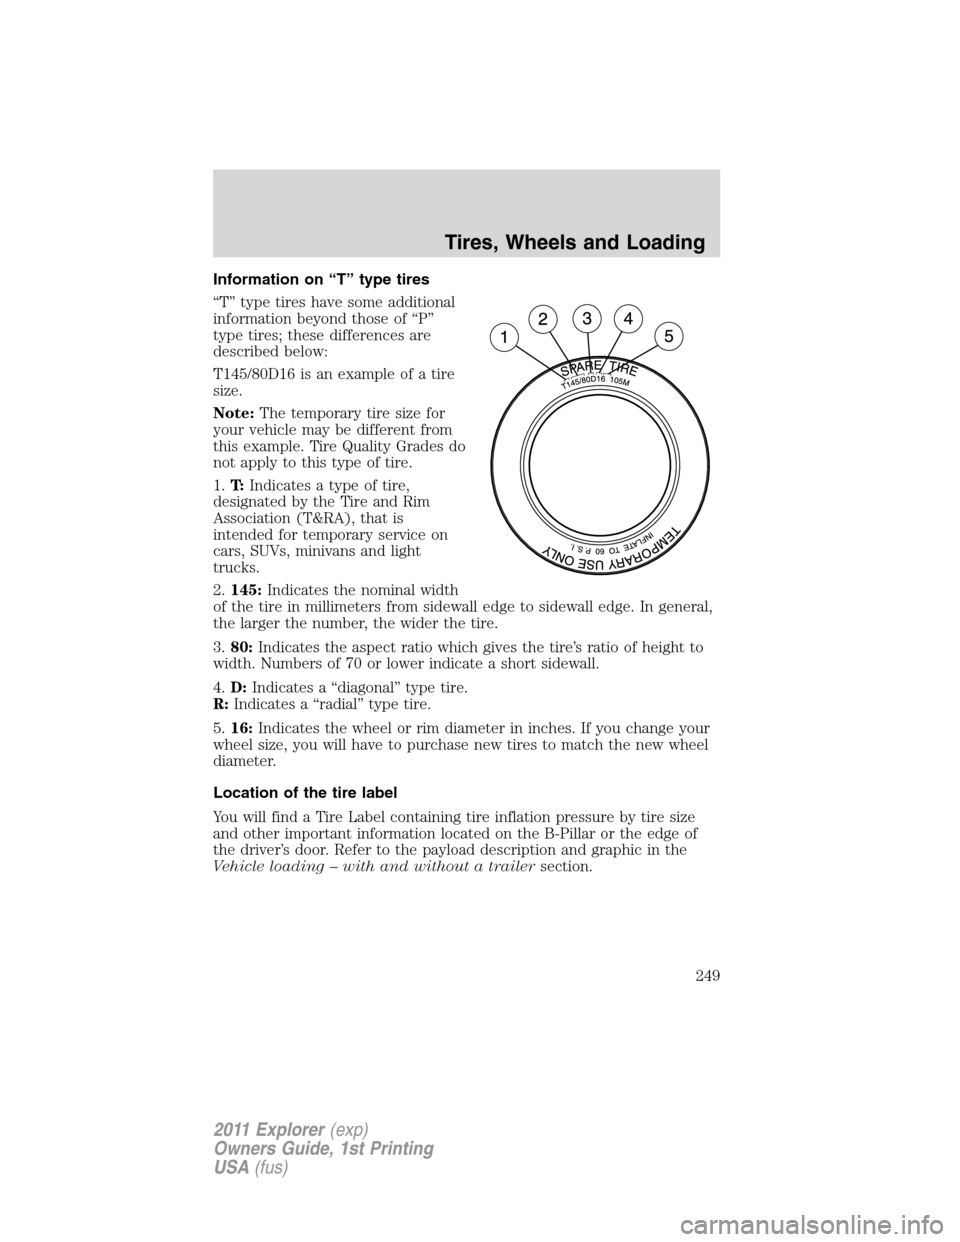 FORD EXPLORER 2011 5.G Owners Manual Information on “T” type tires
“T” type tires have some additional
information beyond those of “P”
type tires; these differences are
described below:
T145/80D16 is an example of a tire
size